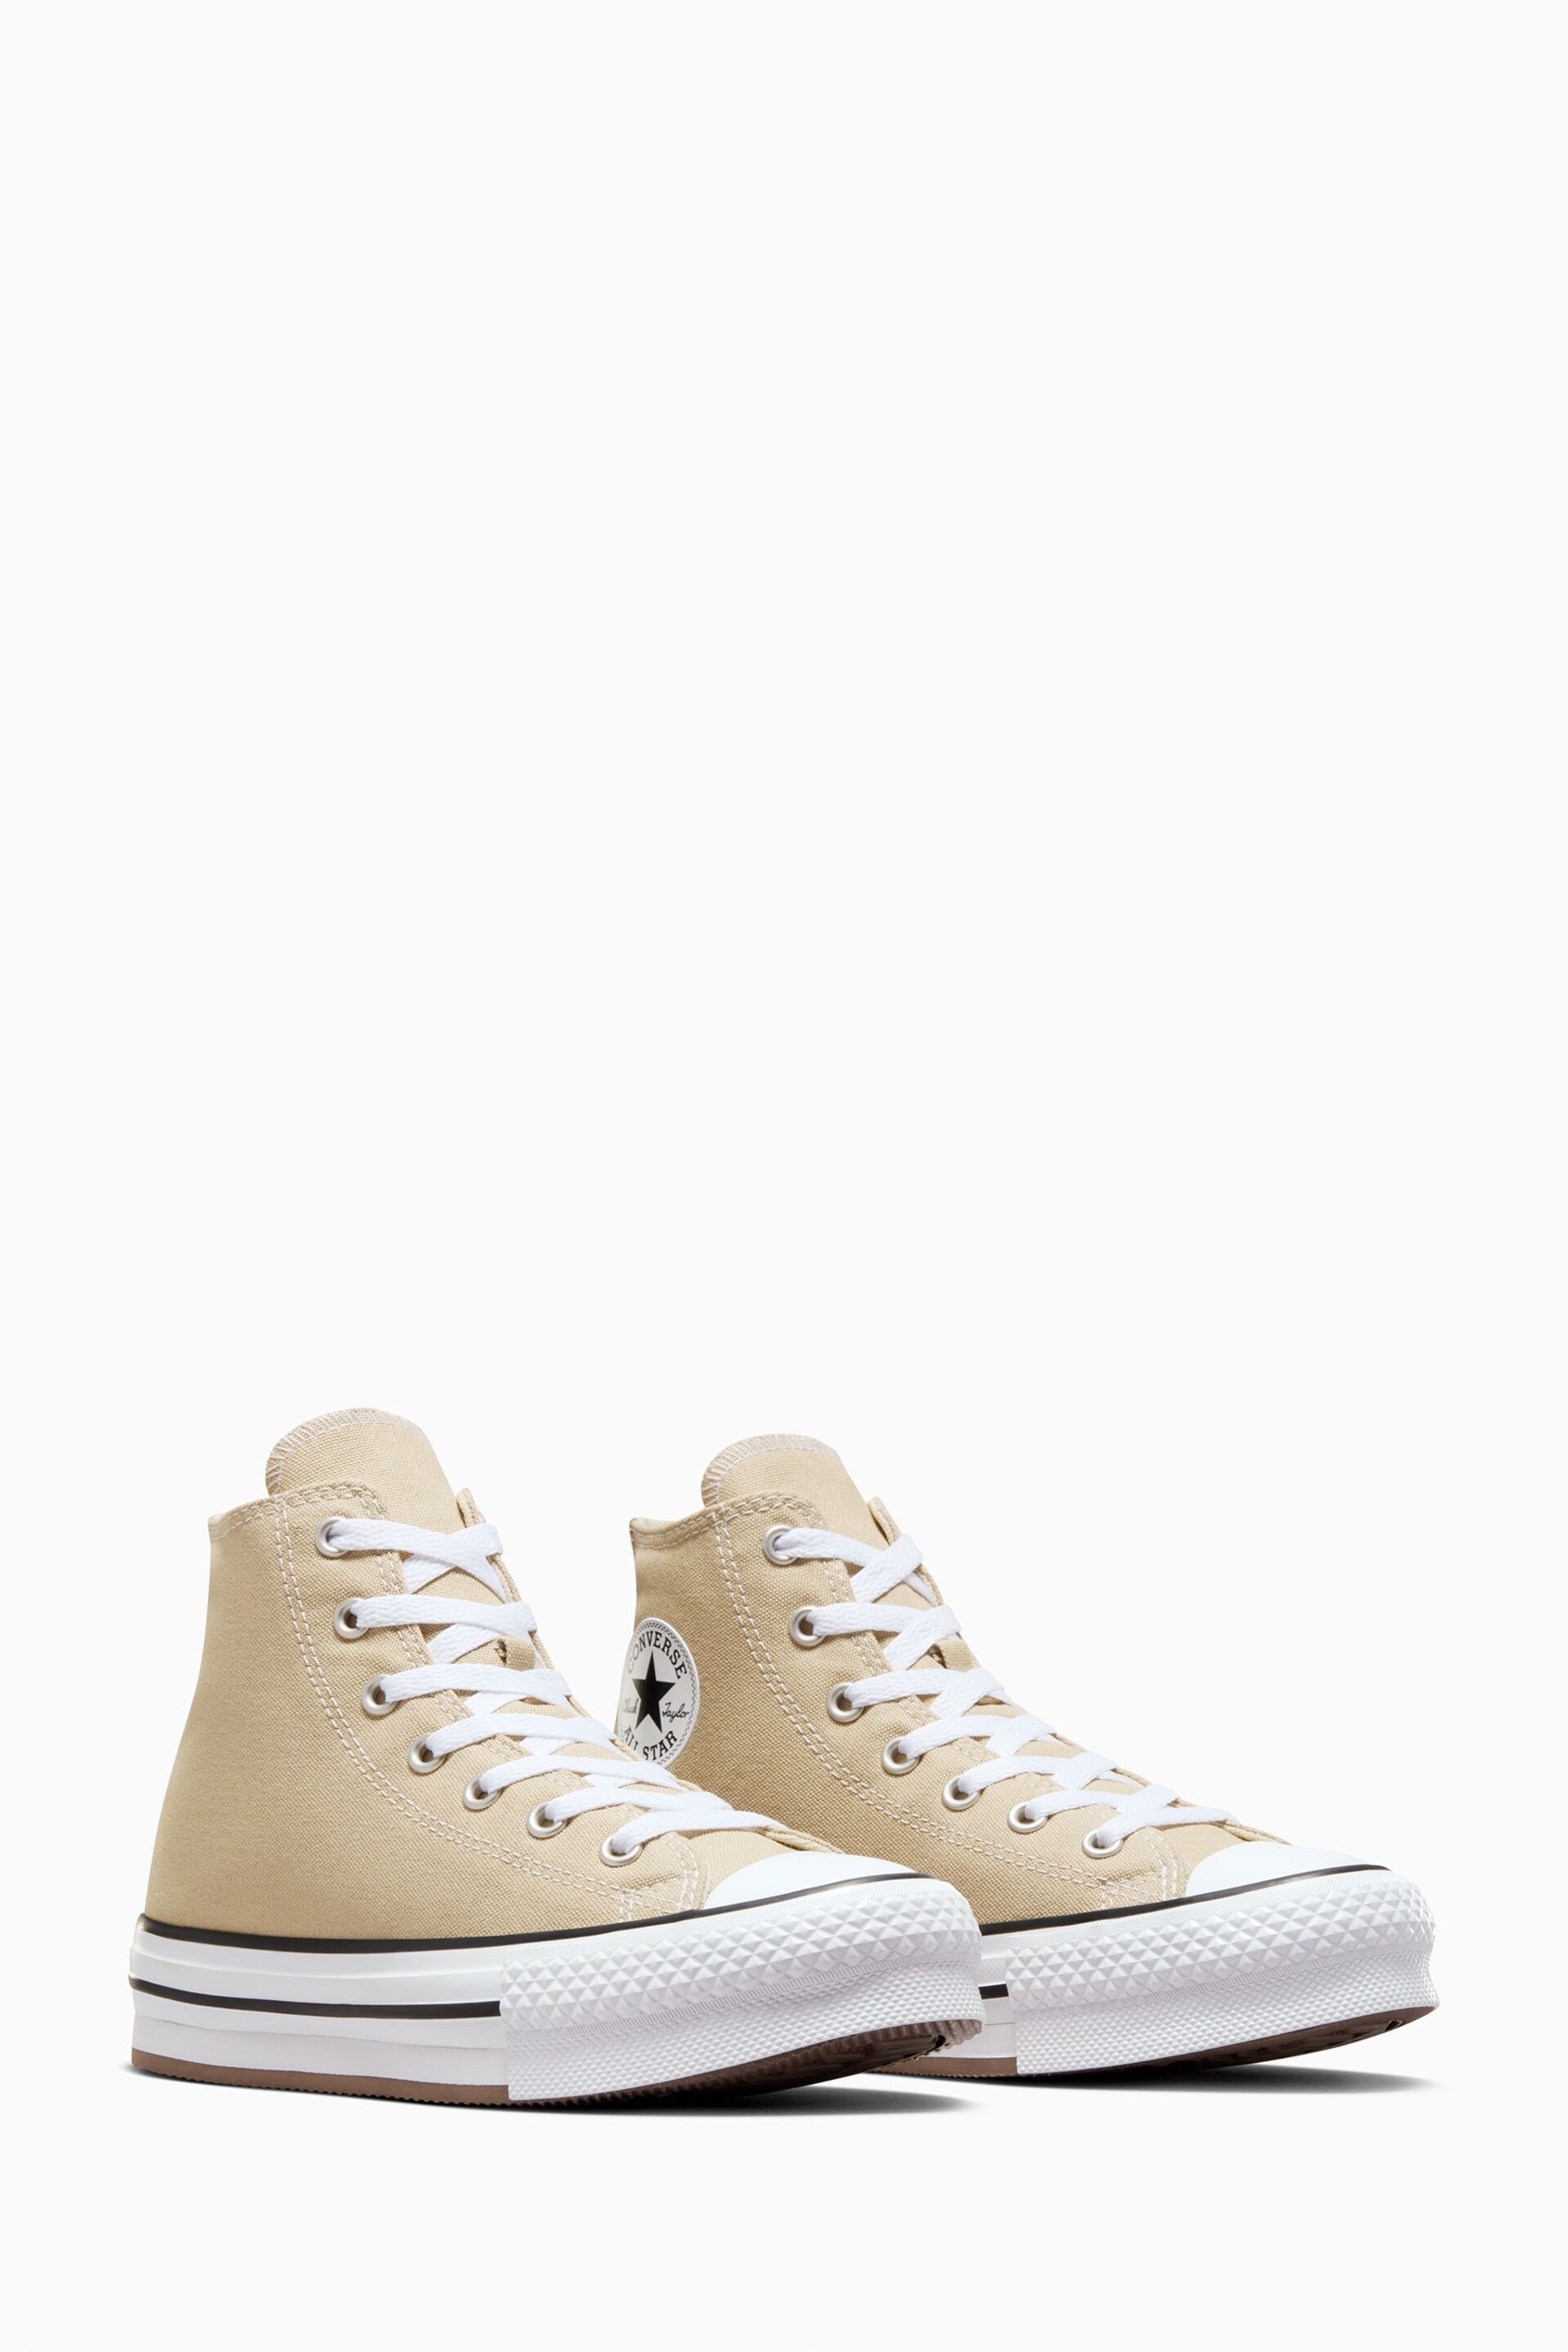 Converse Neutral All Star EVA Lift Junior Trainers - Image 3 of 7